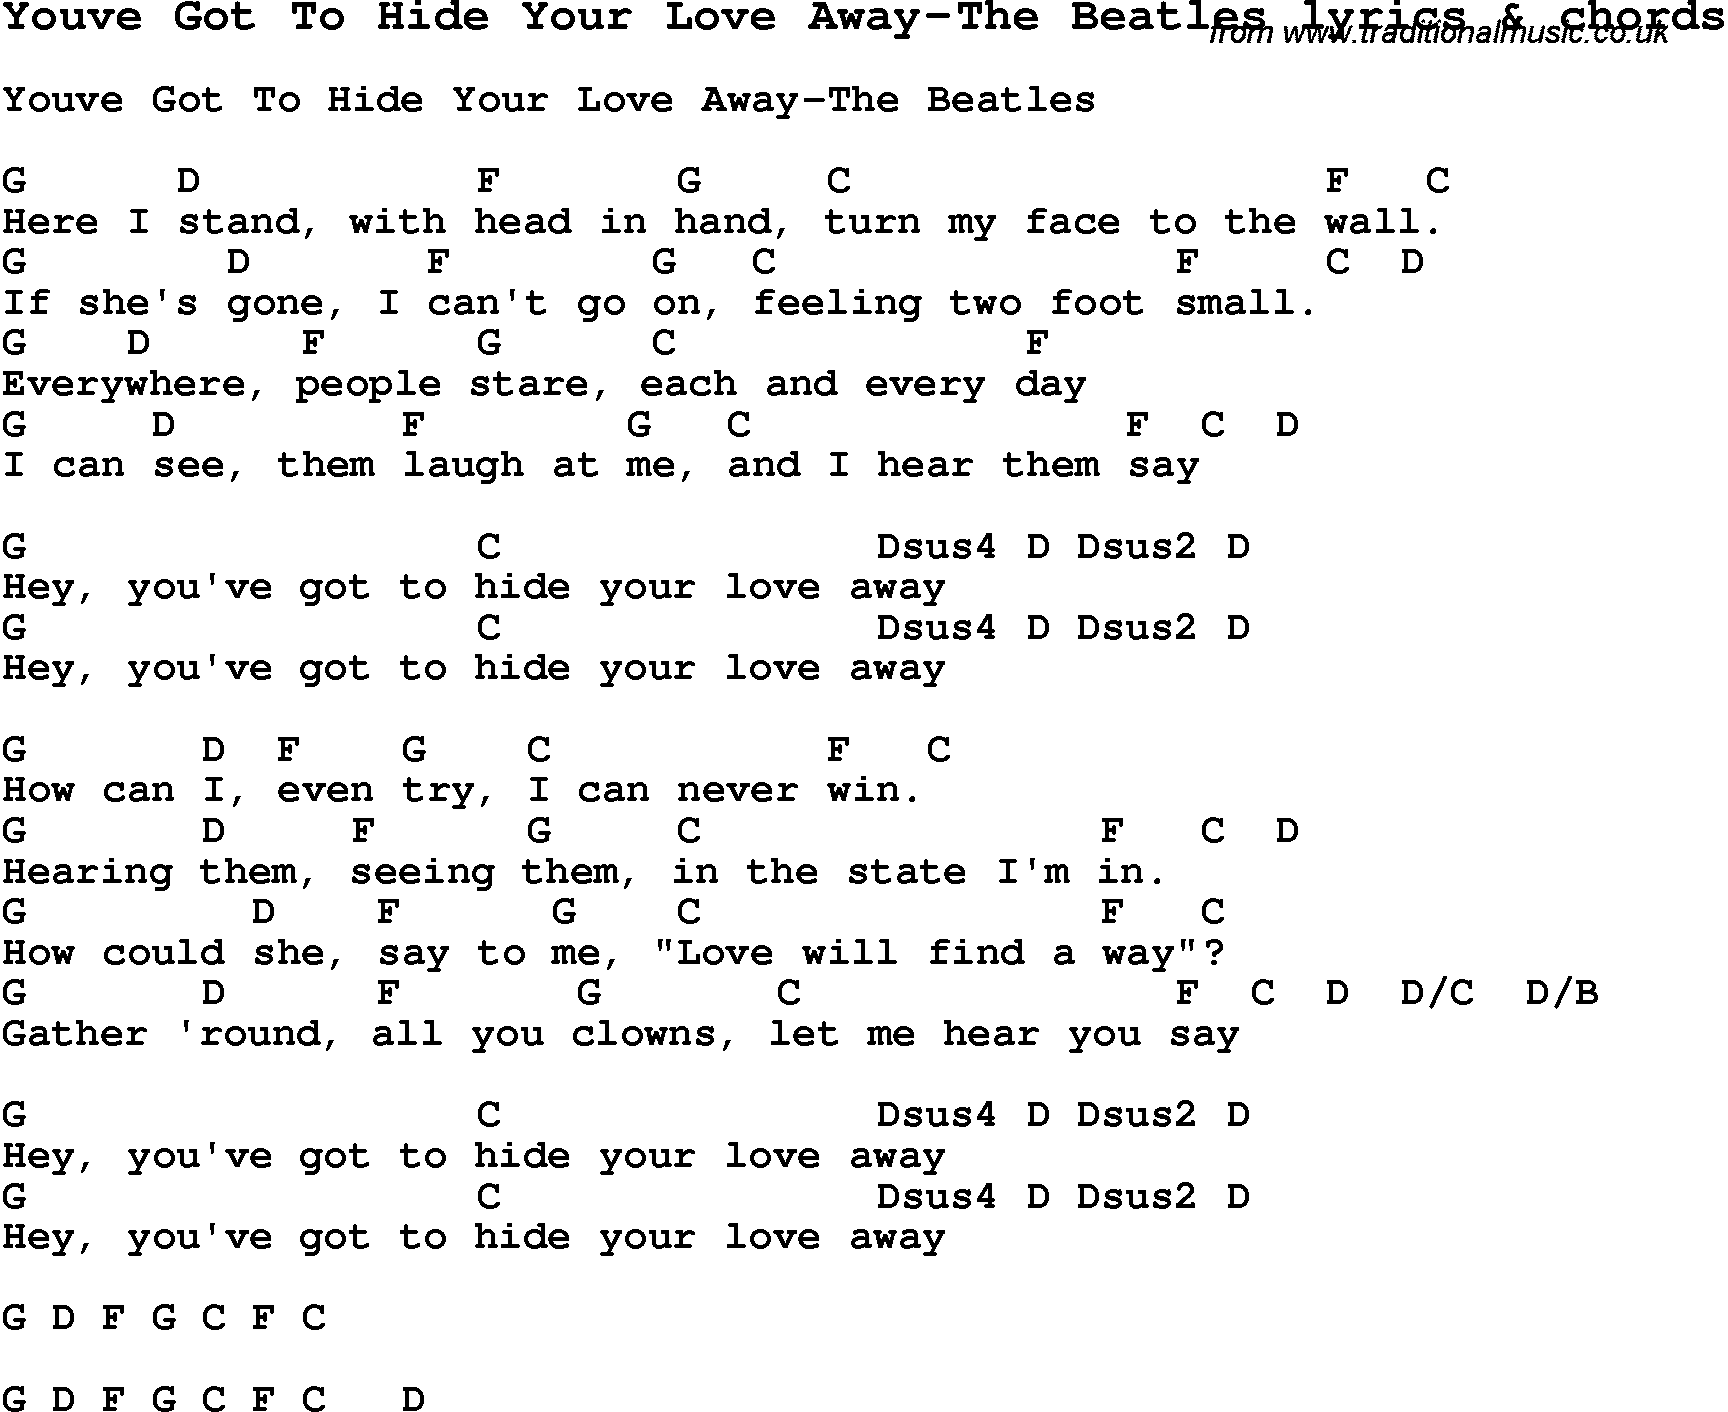 Love Song Lyrics for: Youve Got To Hide Your Love Away-The Beatles with chords for Ukulele, Guitar Banjo etc.